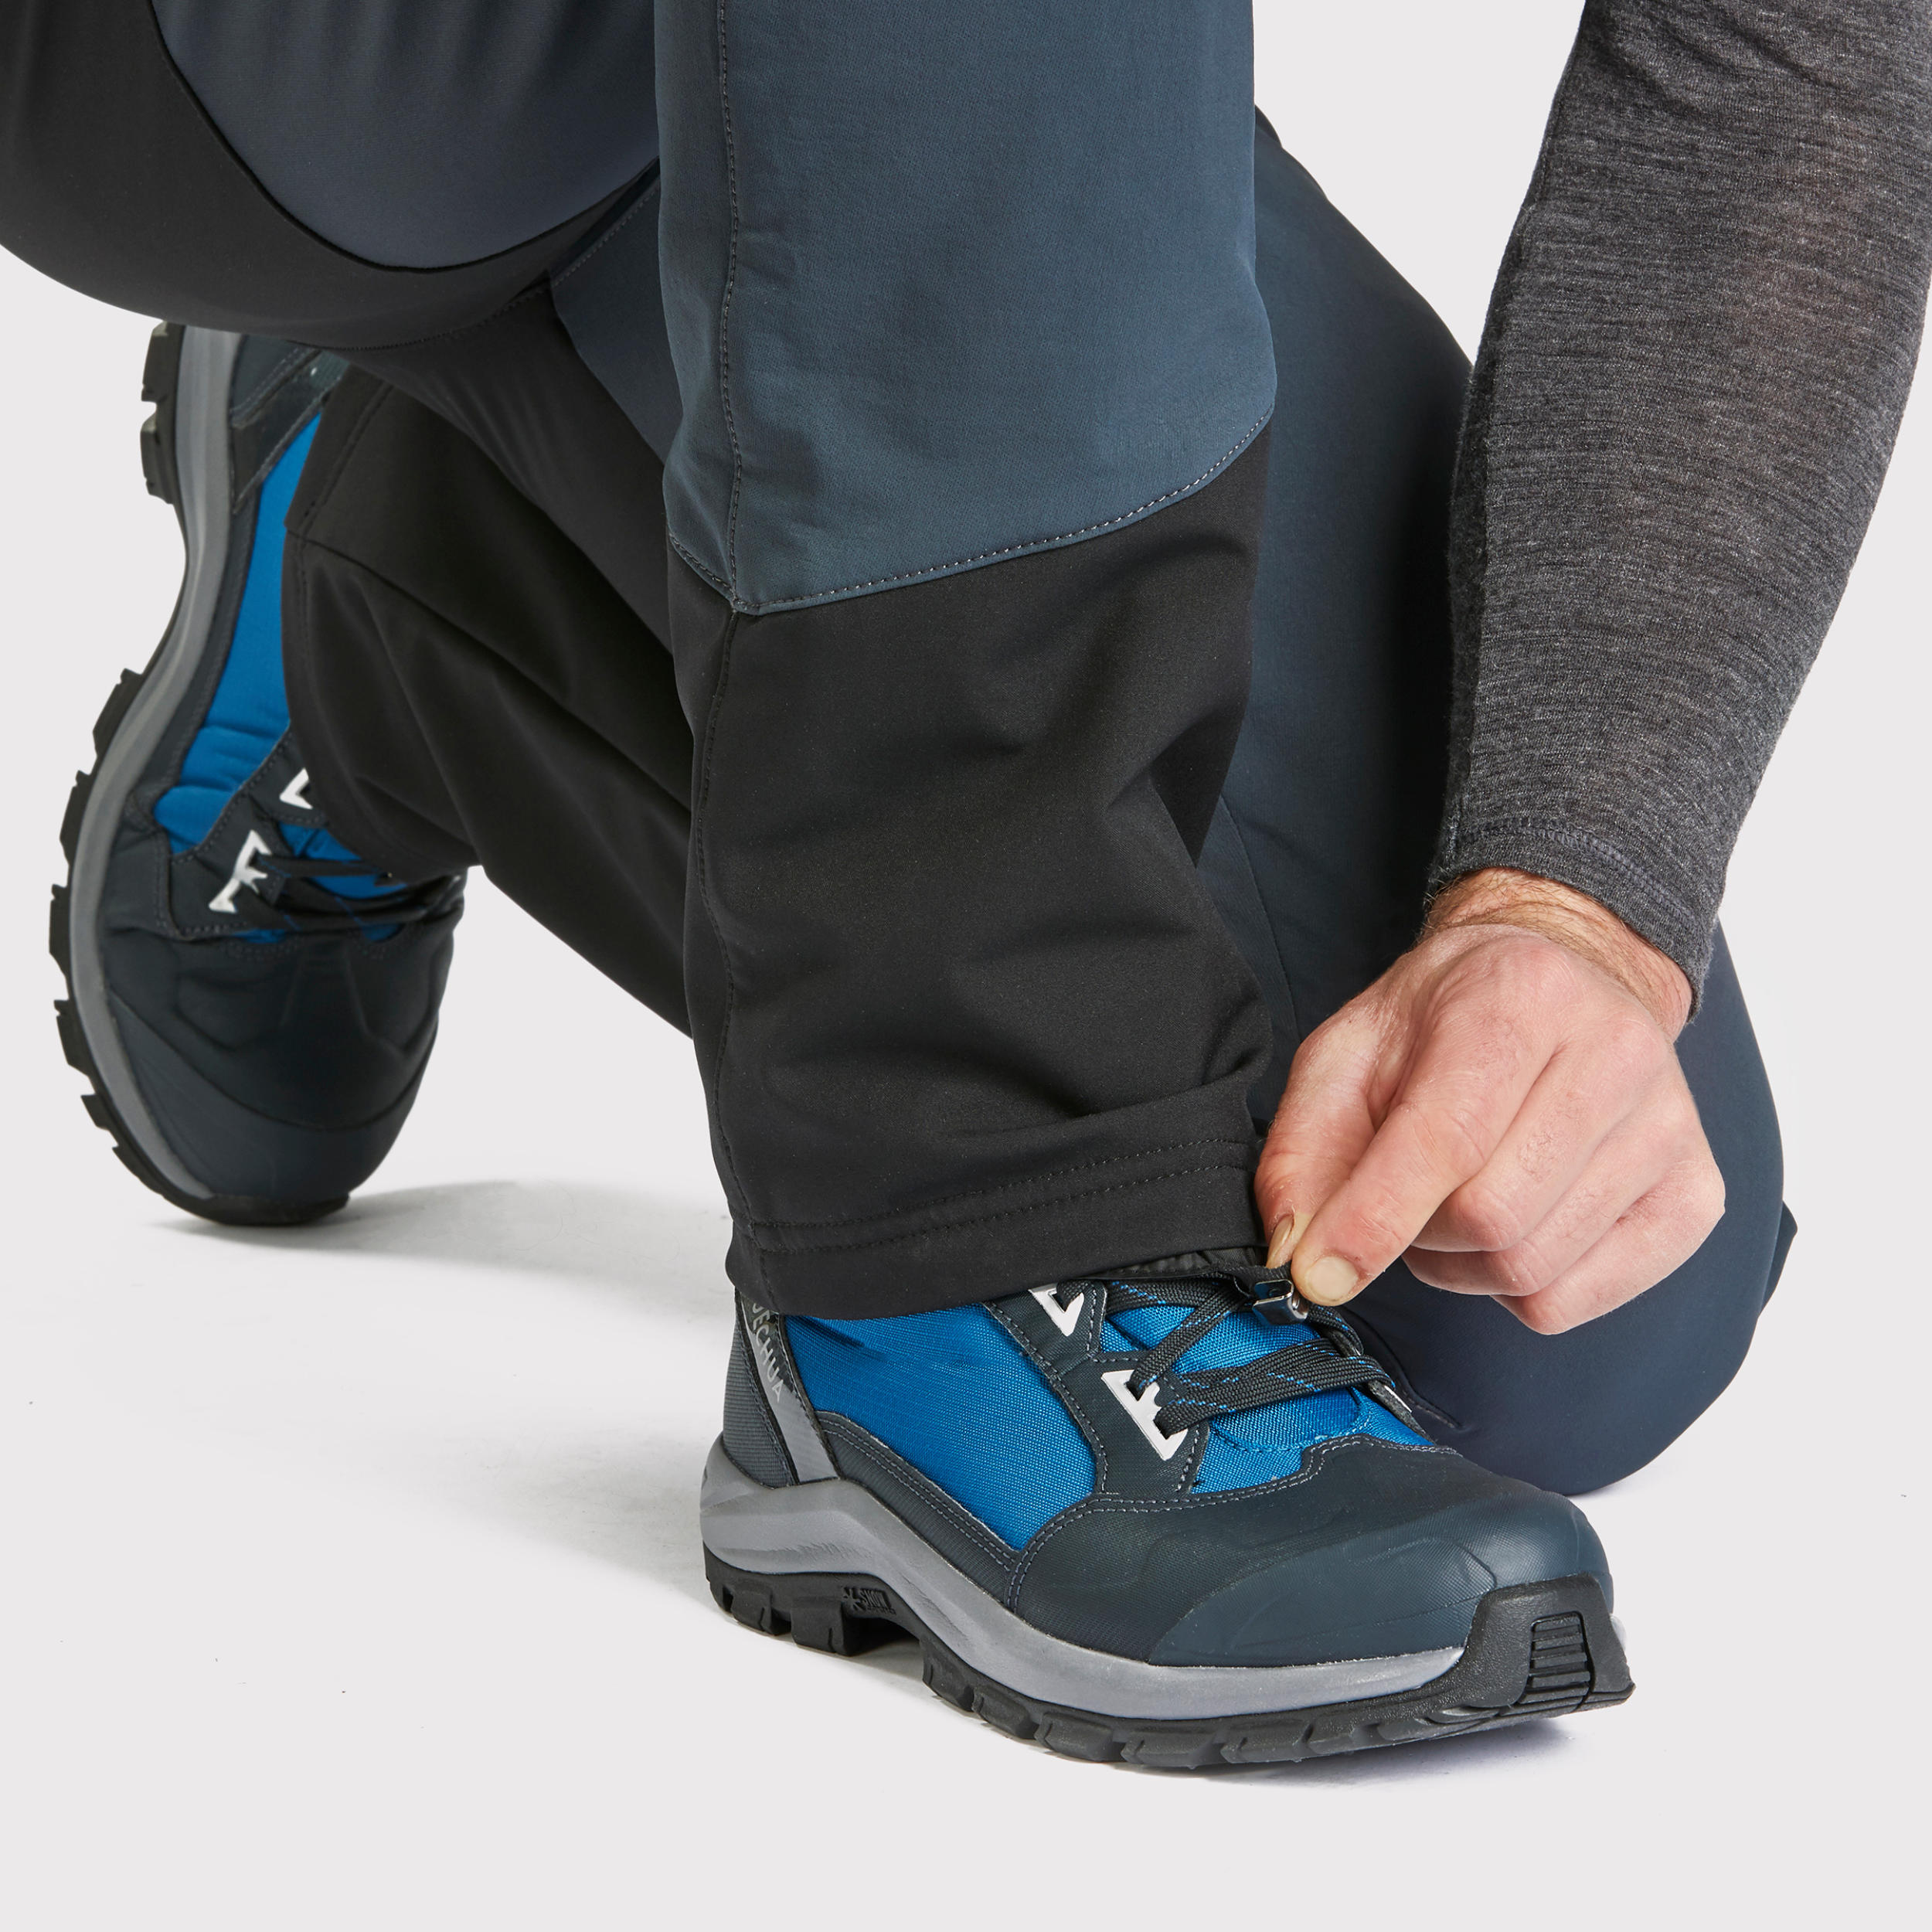 Men’s Warm Water-repellent Ventilated Hiking Trousers - SH500 MOUNTAIN VENTIL   7/9